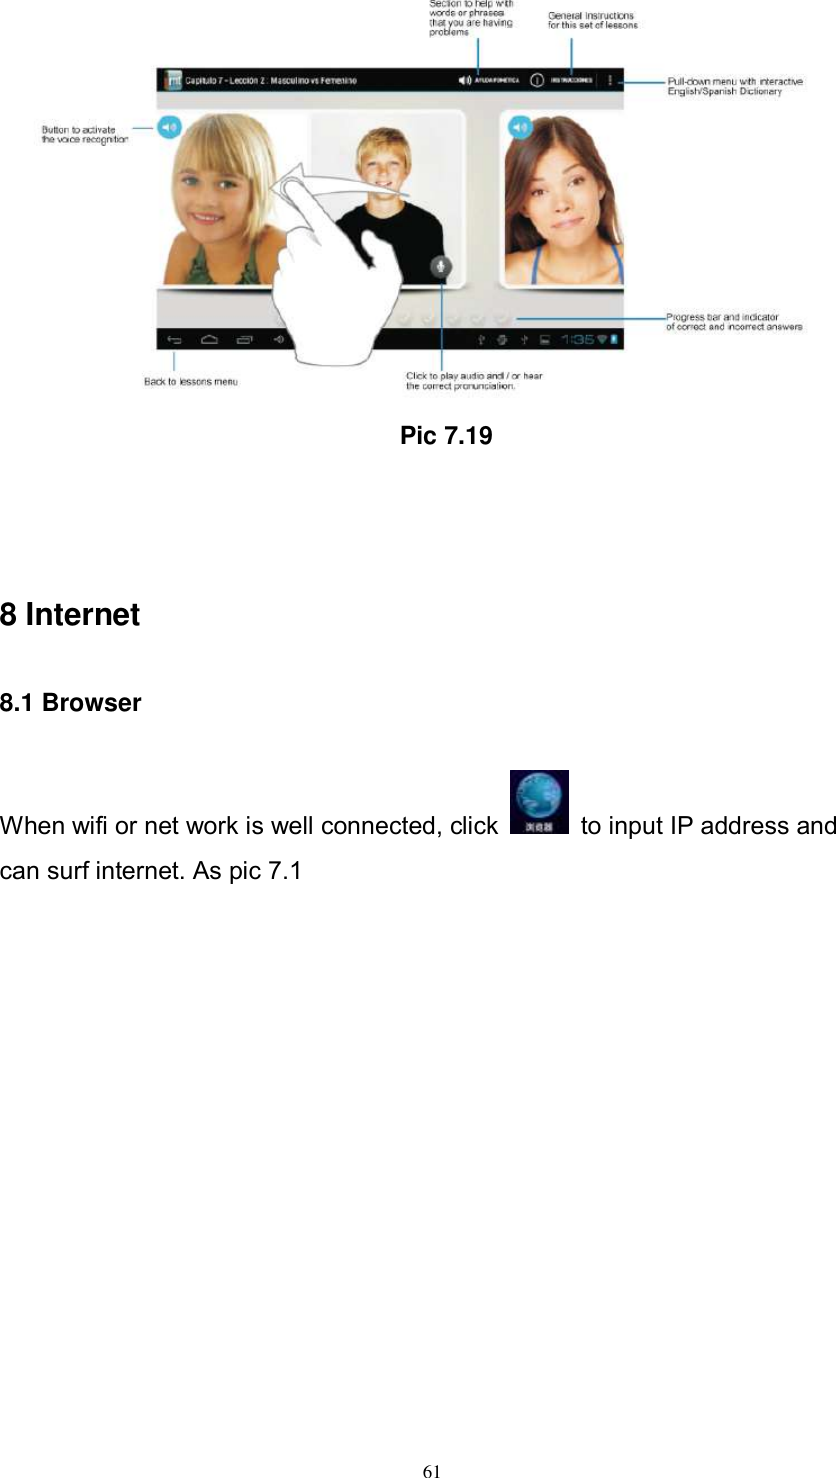      61                                                Pic 7.19     8 Internet 8.1 Browser When wifi or net work is well connected, click    to input IP address and can surf internet. As pic 7.1     